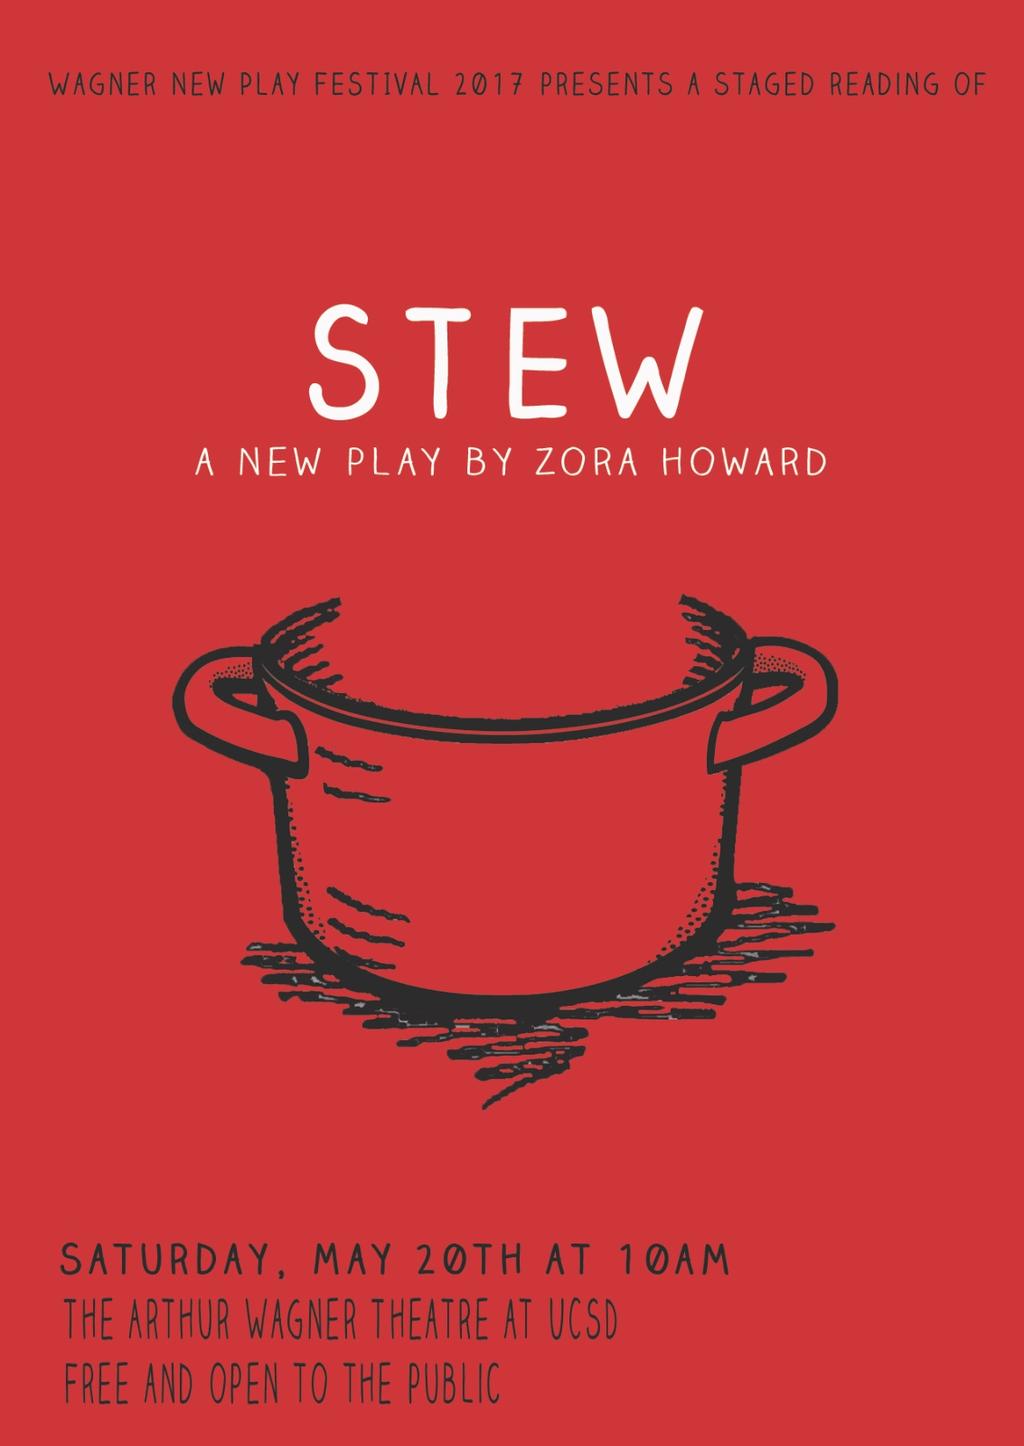 STAGED READING OF STEW TO PREMIERE AT WAGNER NEW PLAY FESTIVAL MFA Acting Alumna Zora Howard has written and directed a new play, Stew which will receive a staged reading as part of the Wagner New